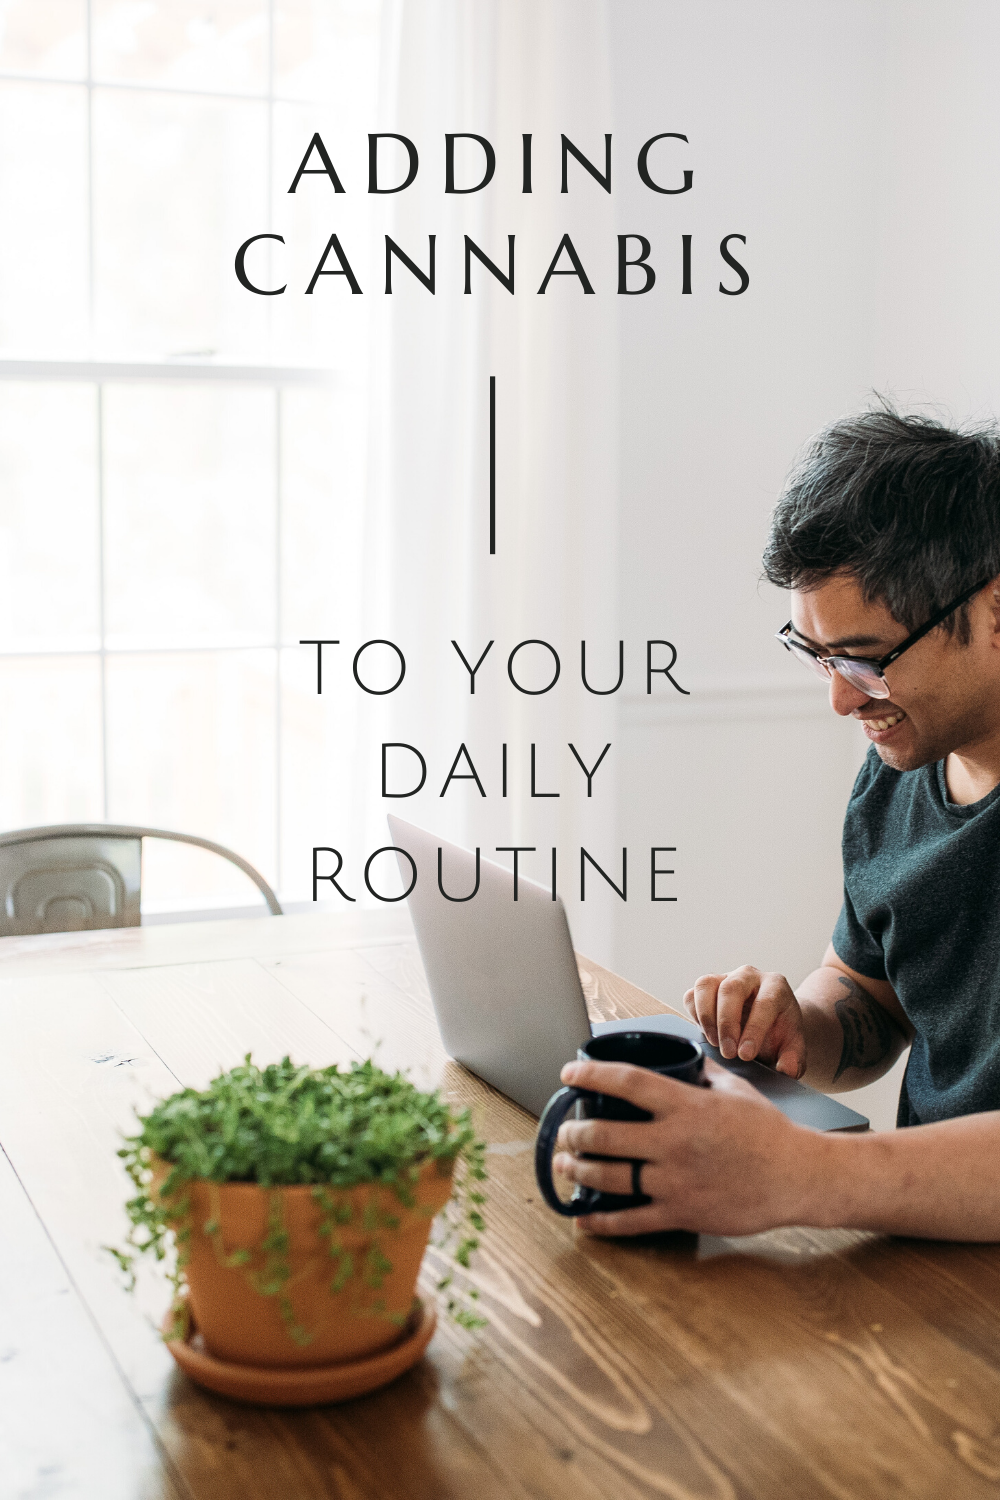 How to Add Cannabis to Your Daily Routine